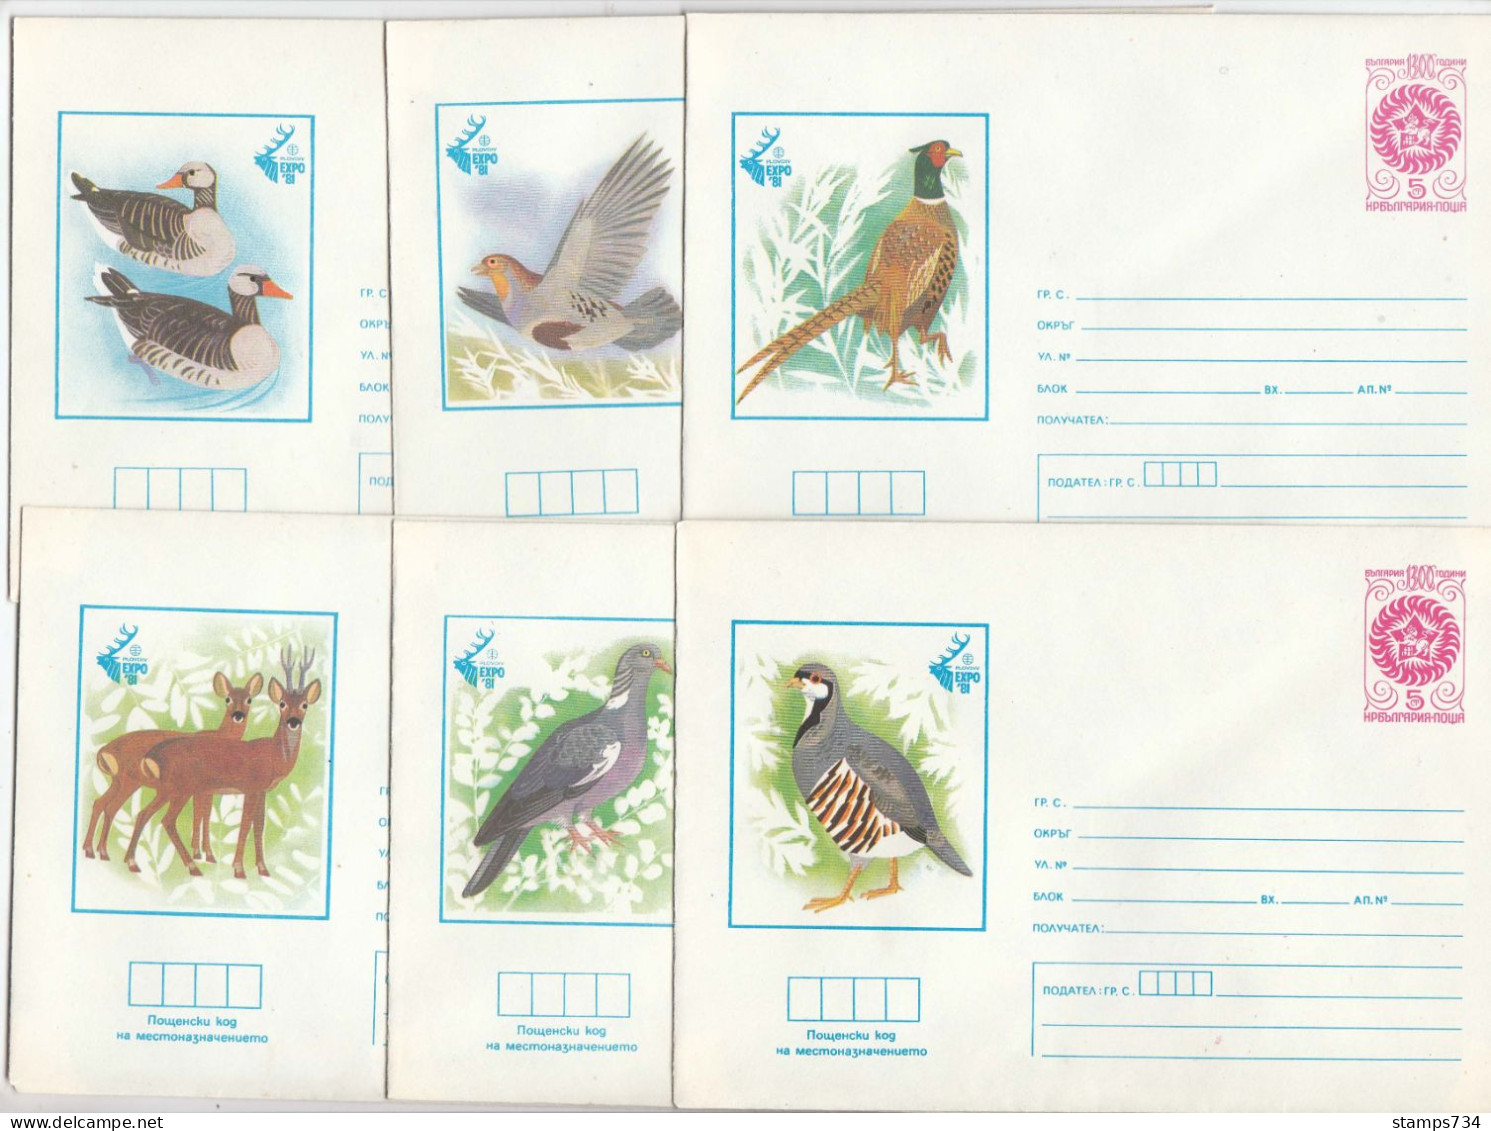 PS 771/1981 - Mint, ЕXPO'81: Hunting Animals, Full Complete Ot 27 Covers, Post. Stationery - Bulgaria(5 Scan) - Enveloppes